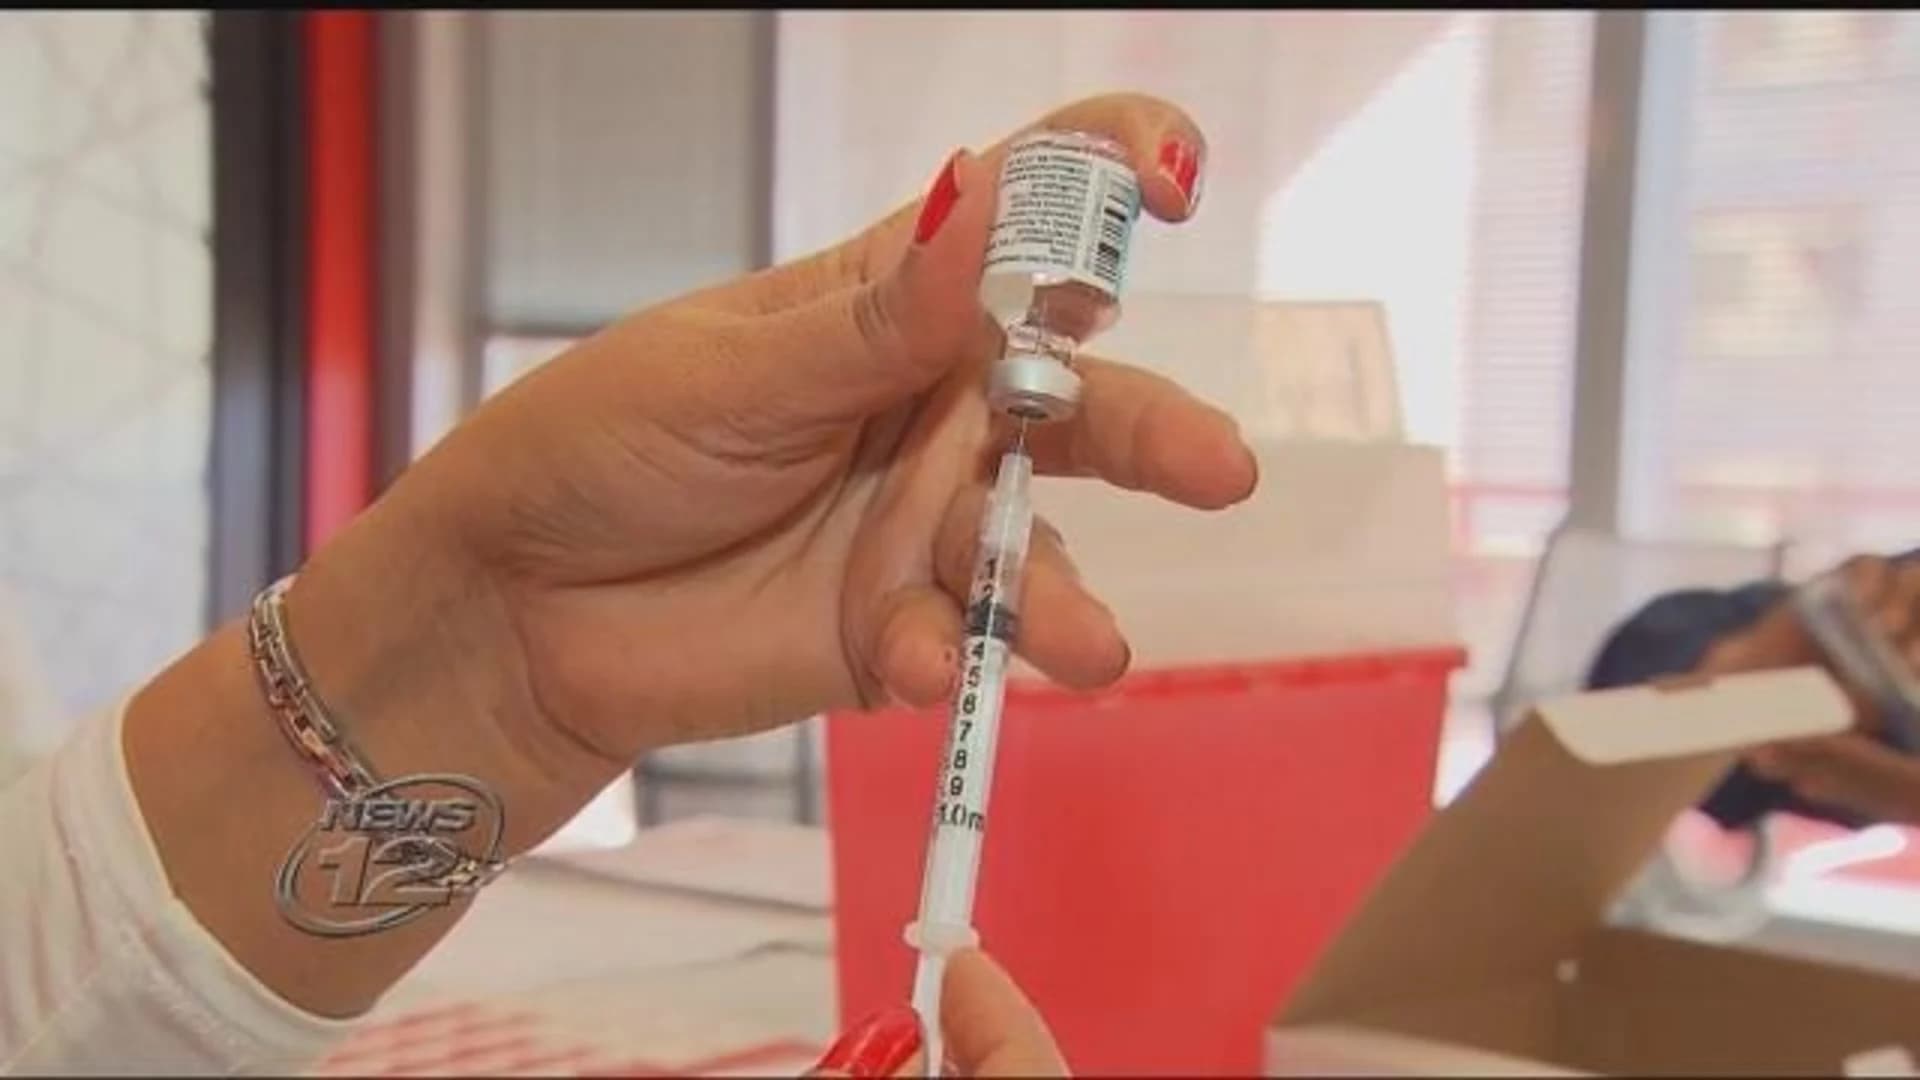 First case of measles reported in Westchester County